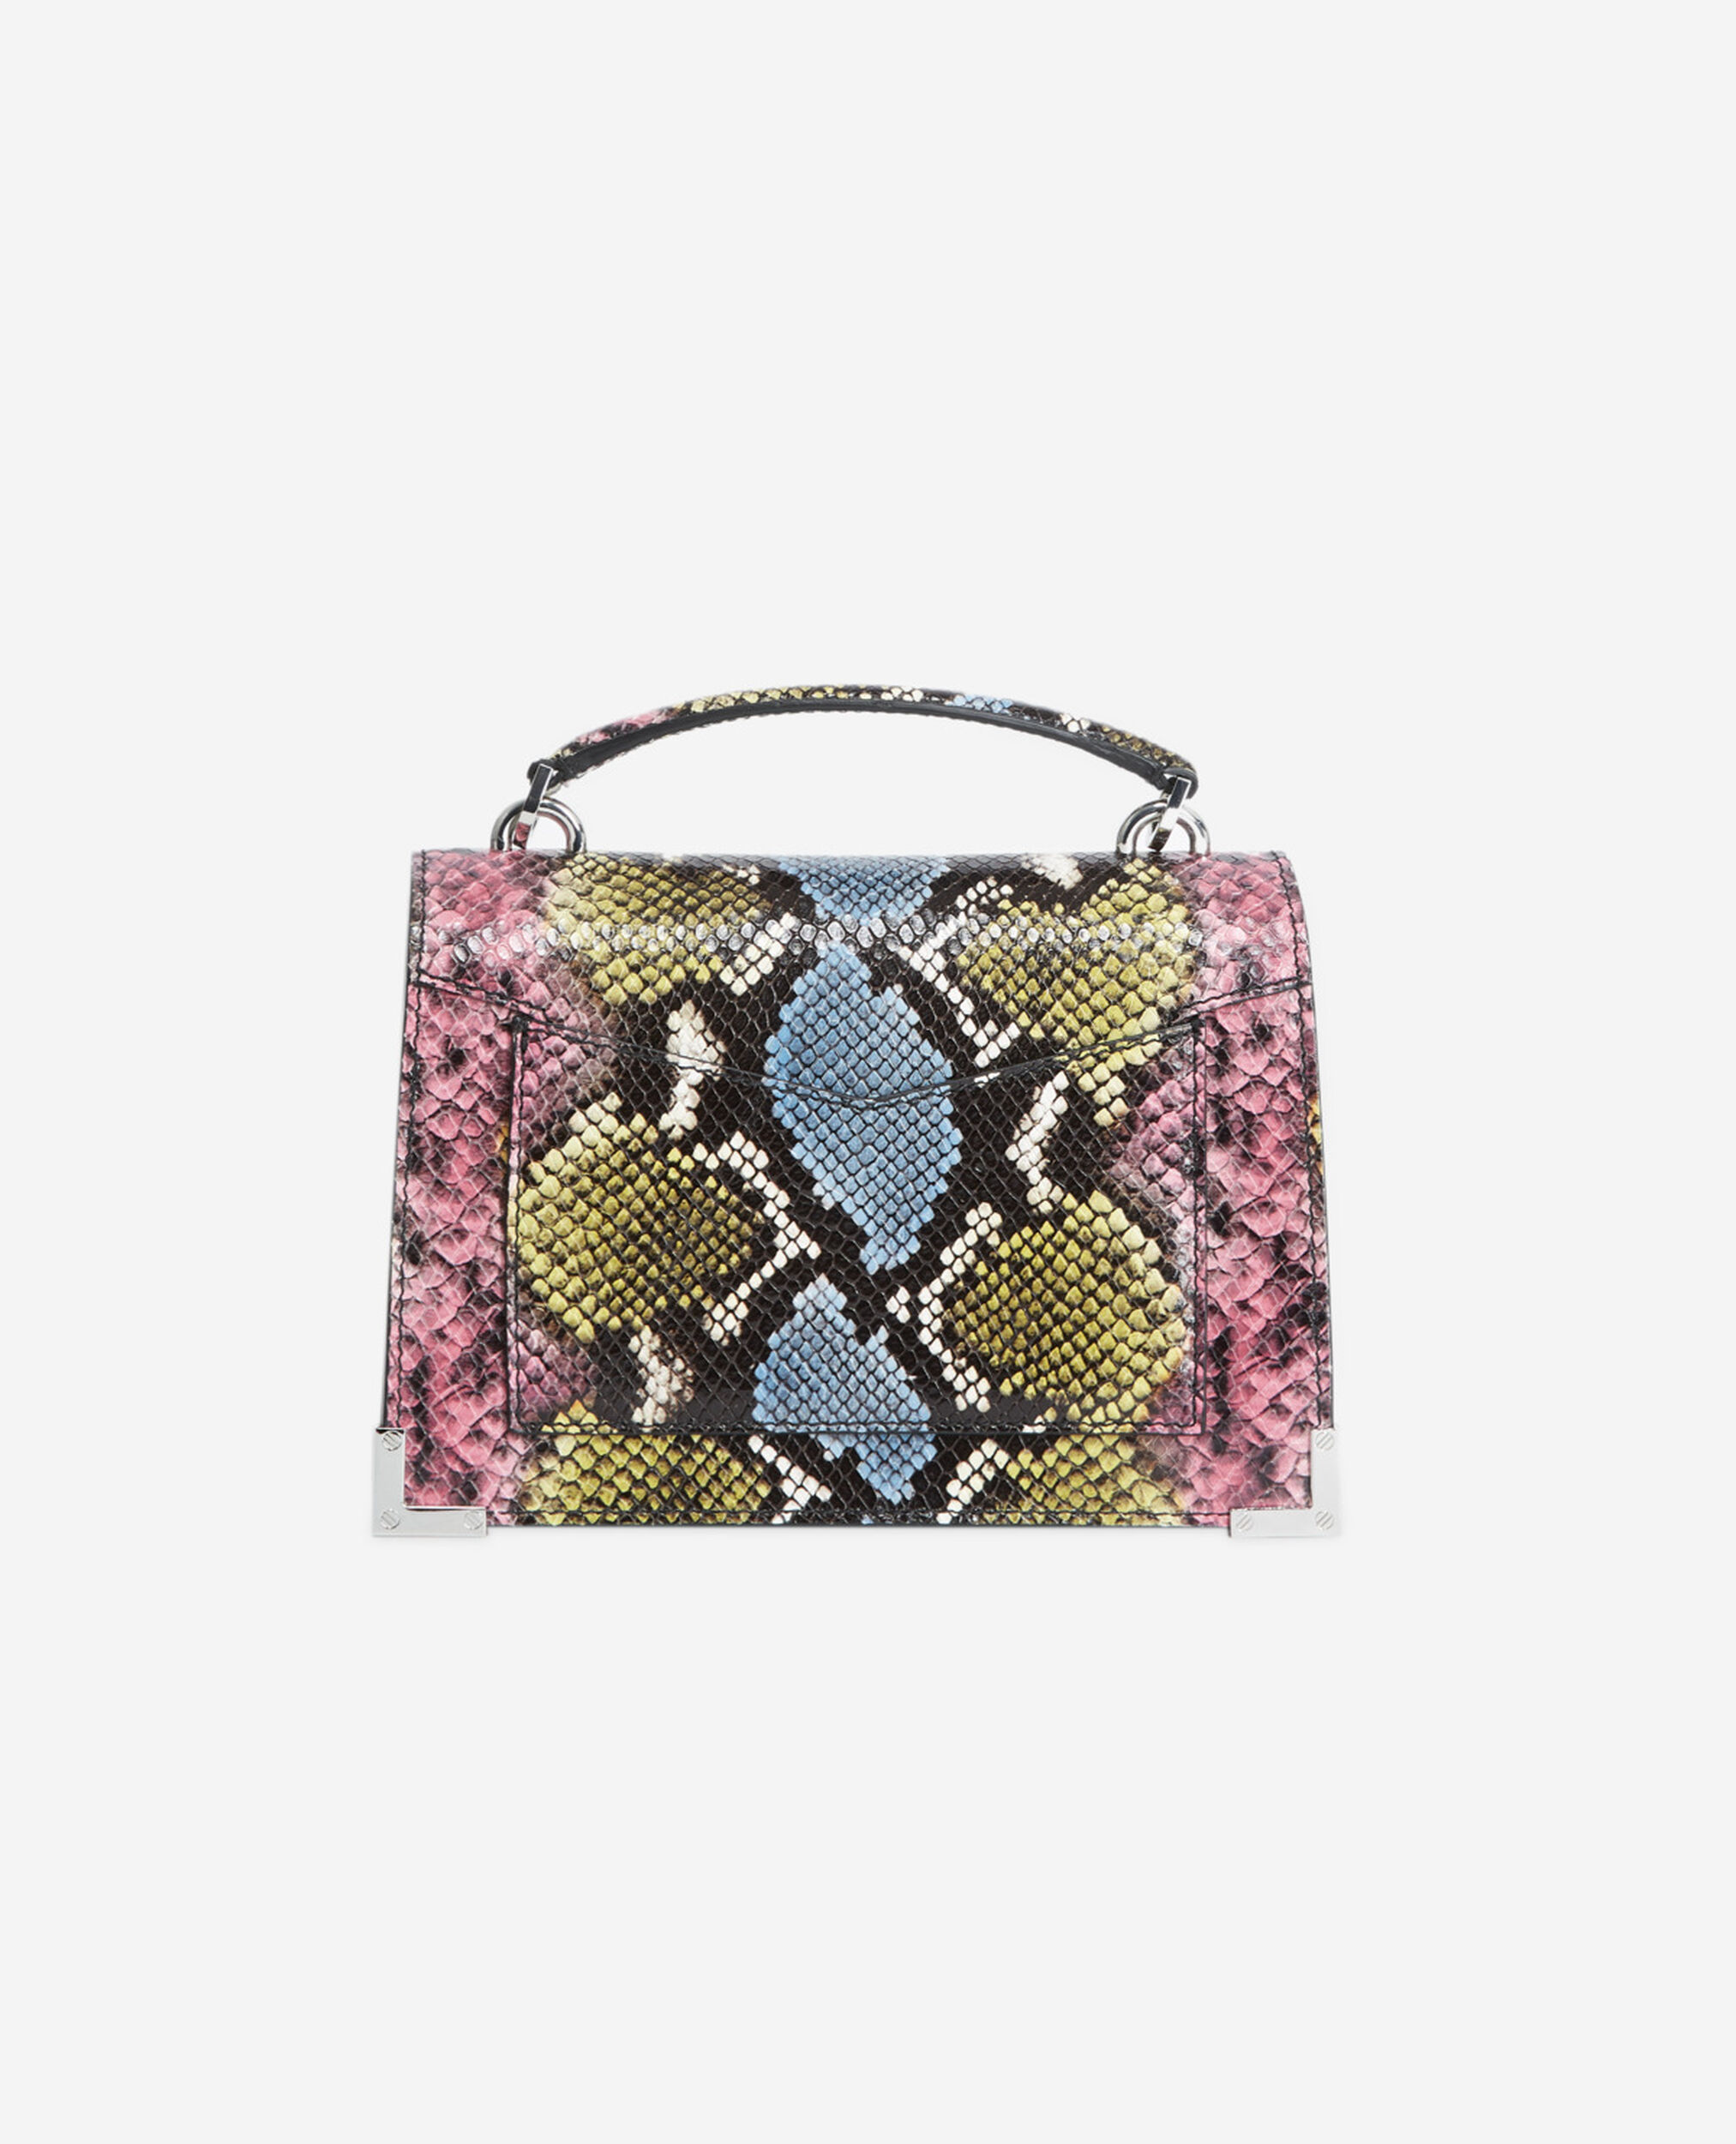 Small Emily bag in multicolored leather, MULTICOLOR, hi-res image number null